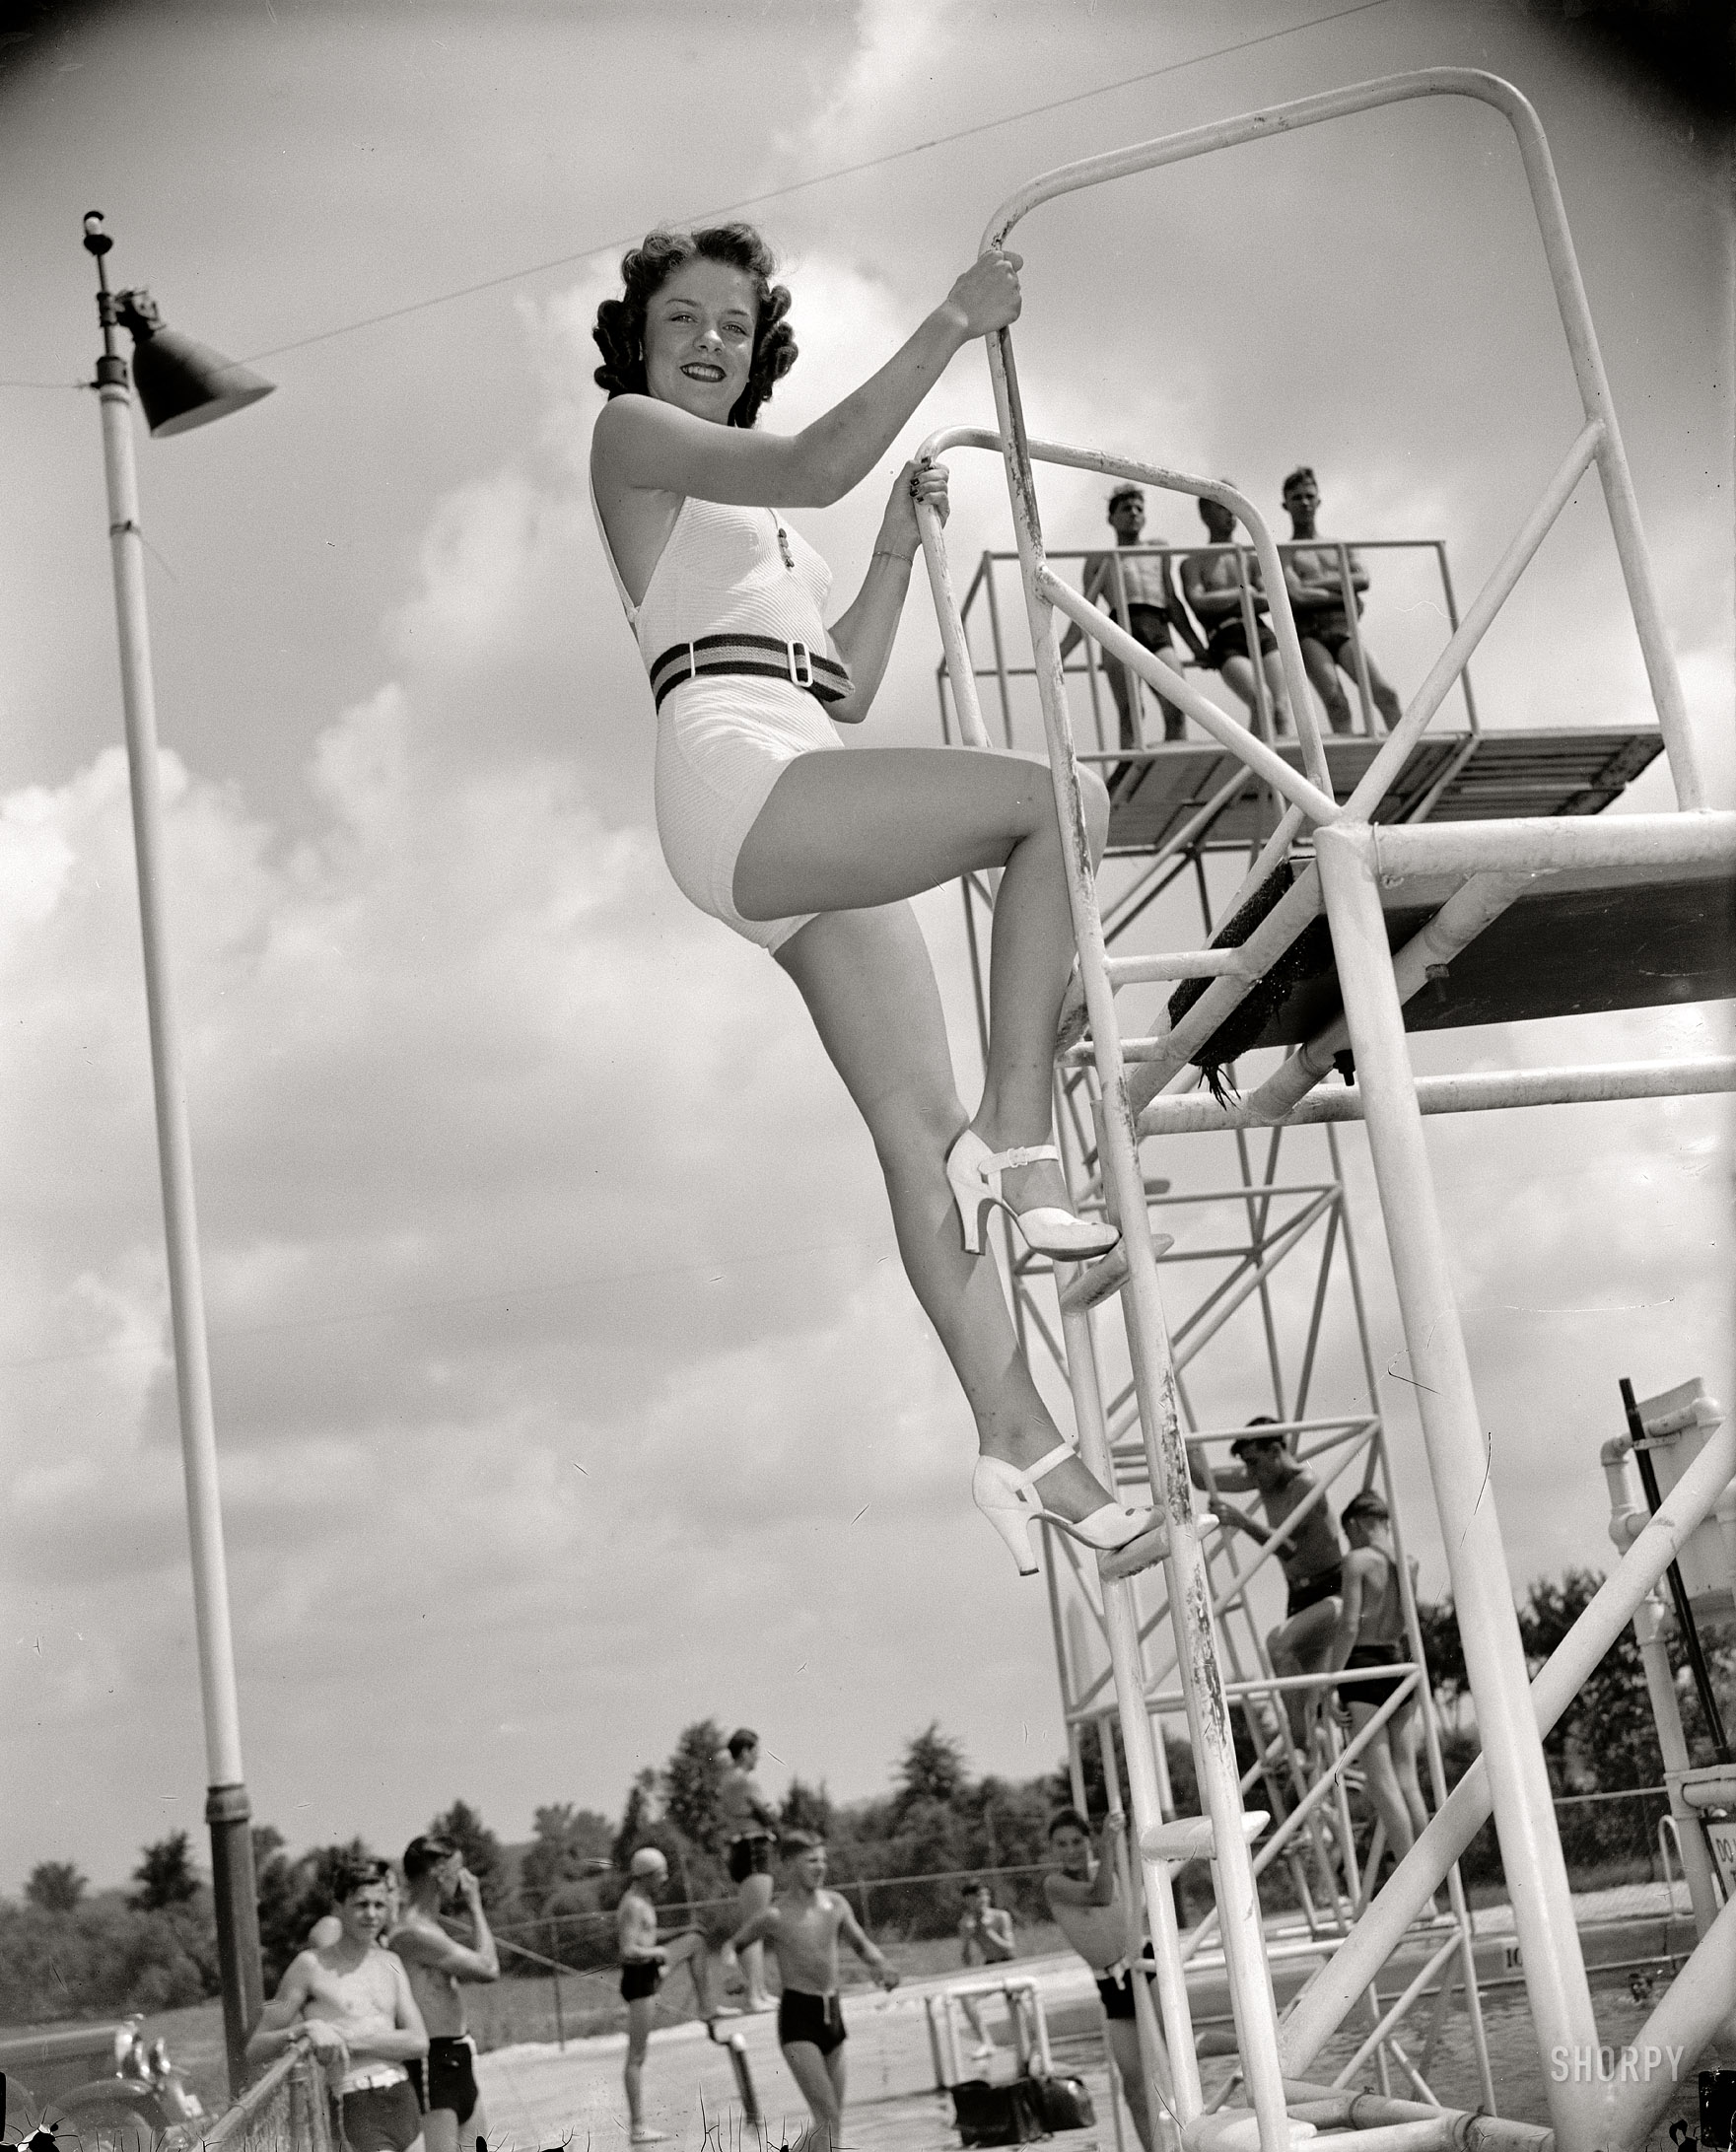 August 4, 1938. Washington, D.C. "Miss Dorothy Parker has been selected as Miss Washington and will compete for the title of Miss America at the Atlantic City beauty pageant to be held during Labor Day week. 18 Years old, she weighs 112 pounds and is 5 feet, 4 inches in height. She is the daughter of Mr. and Mrs. C. Albert Parker of Washington." Harris & Ewing glass negative. View full size.